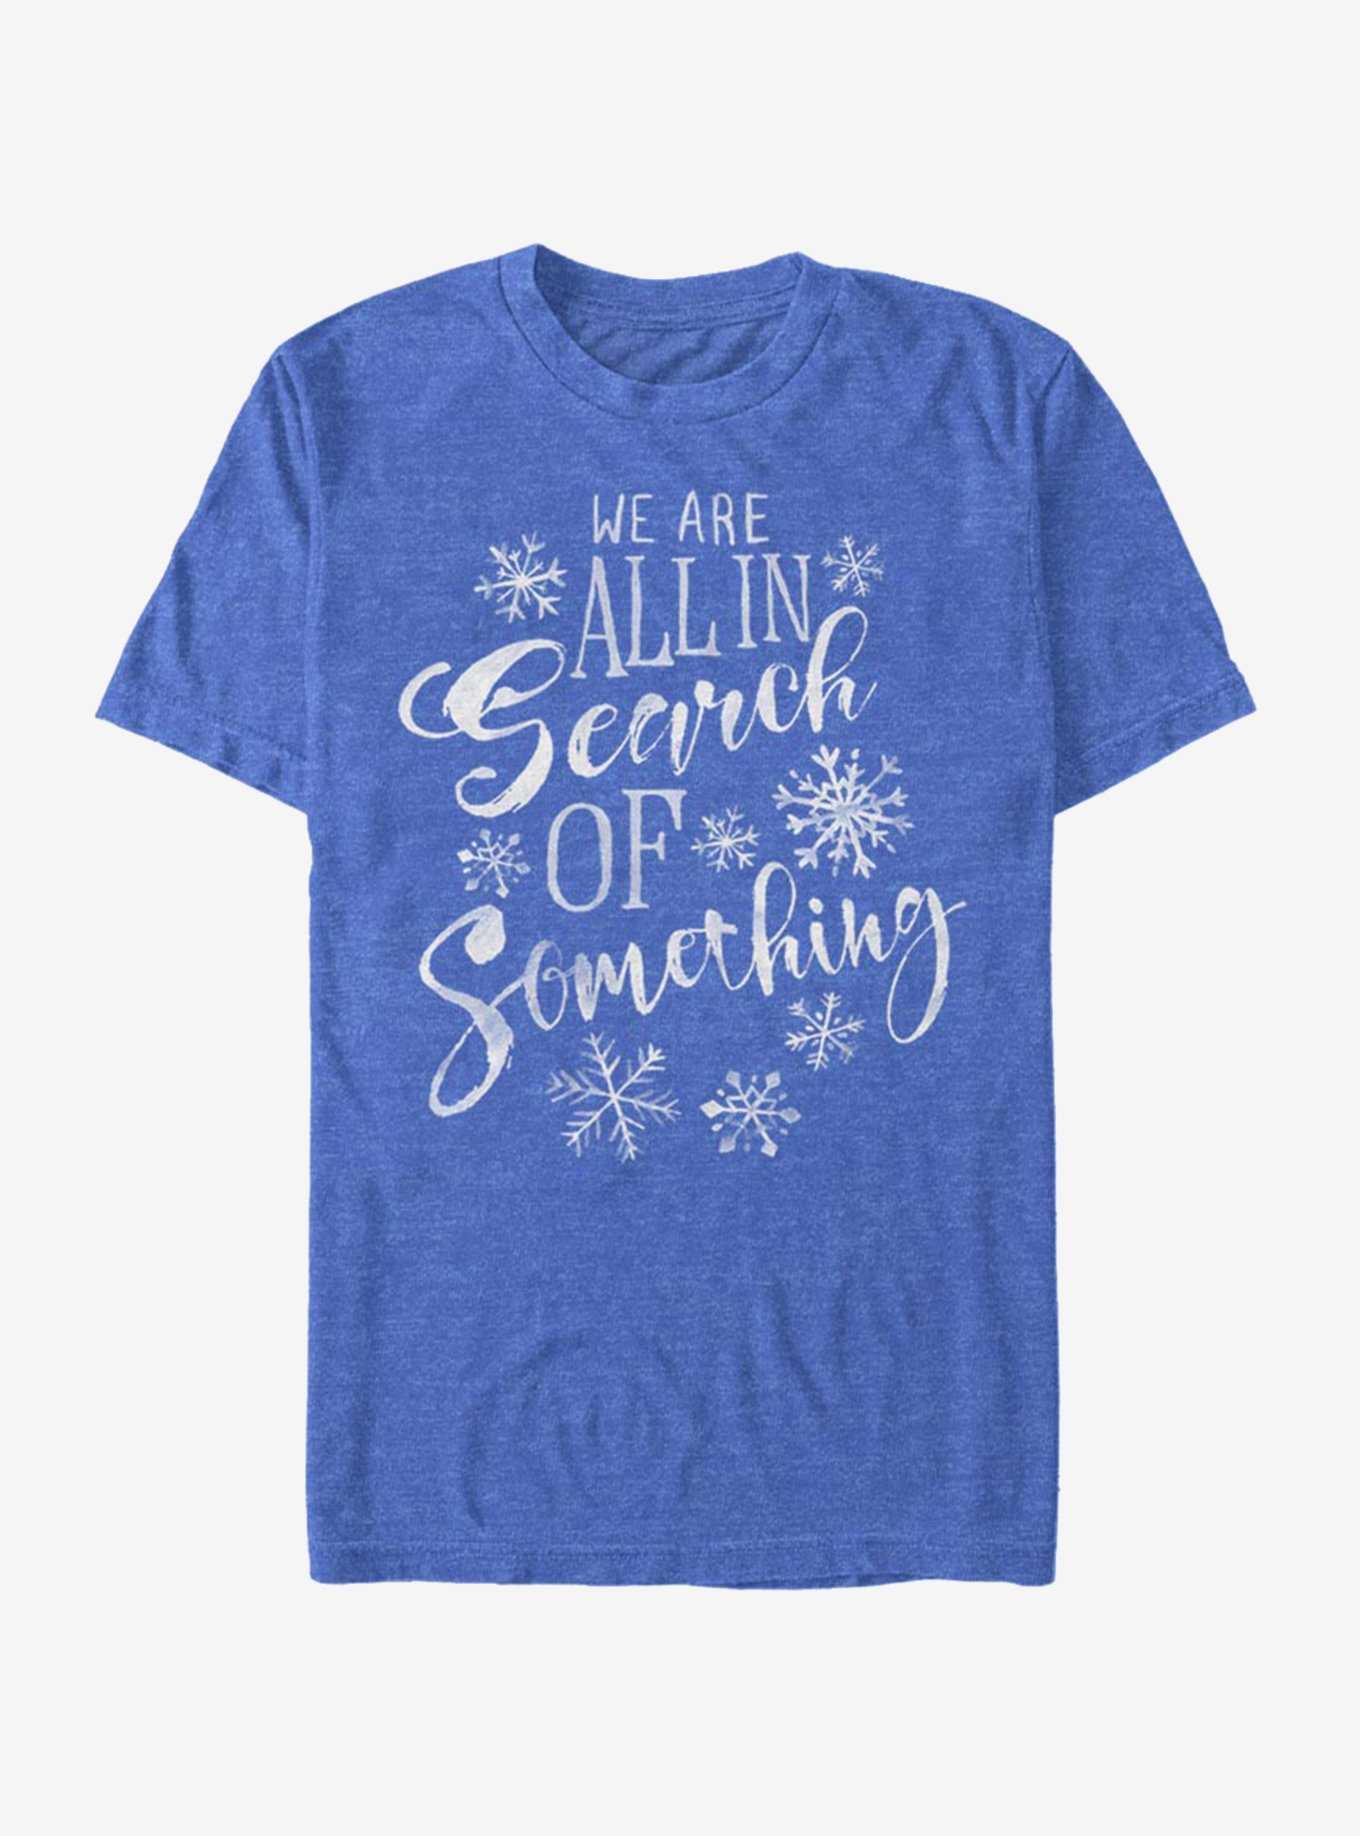 Disney Frozen 2 In Search Of Something T-Shirt, , hi-res